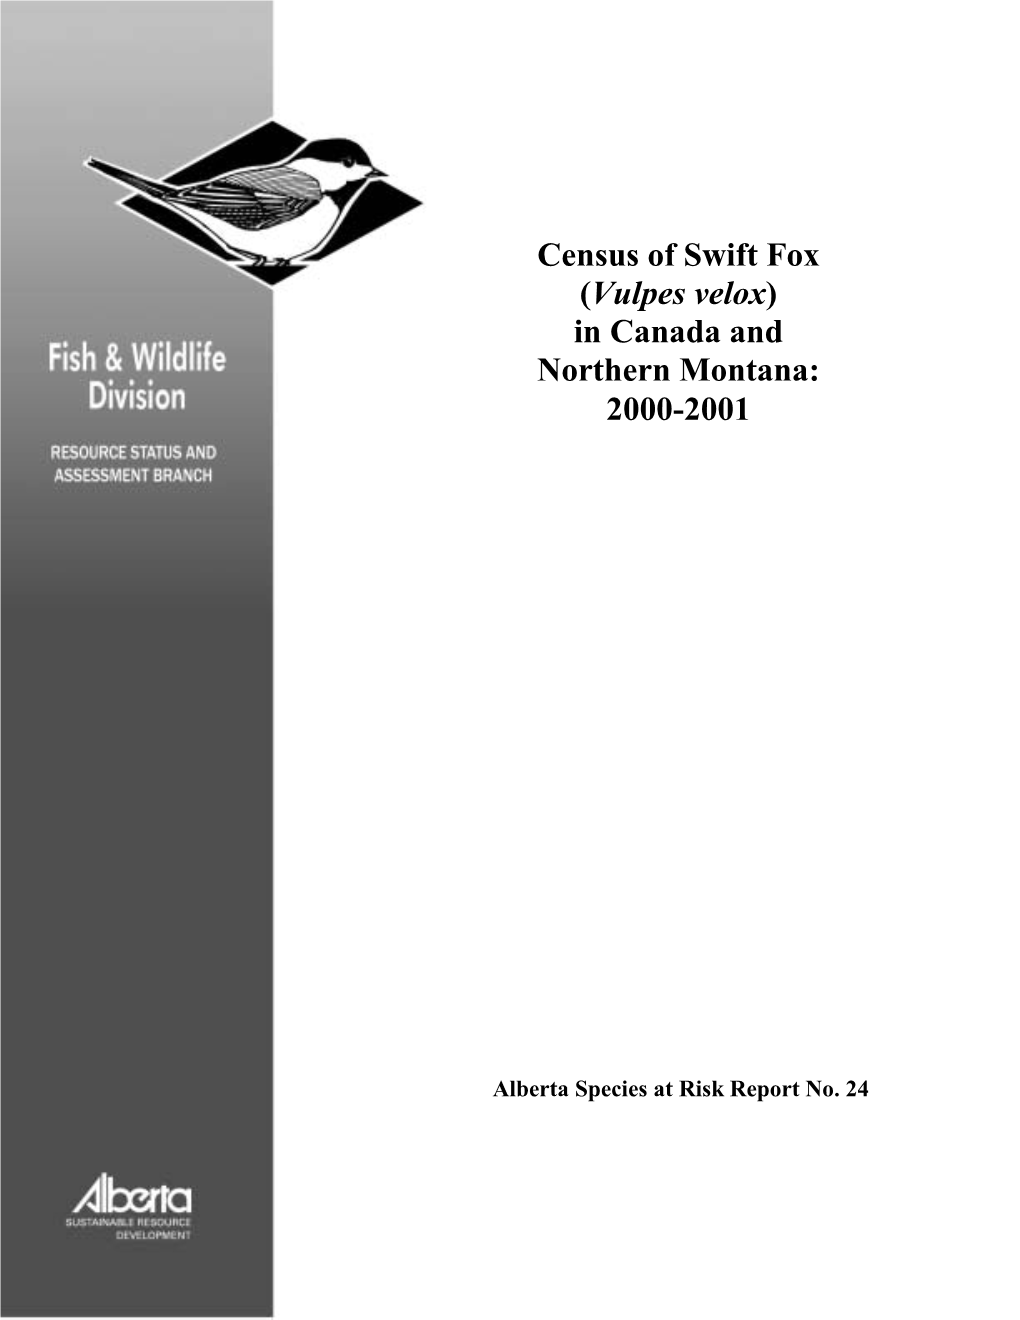 Census of Swift Fox in Canada and Northern Montana 2000-2001